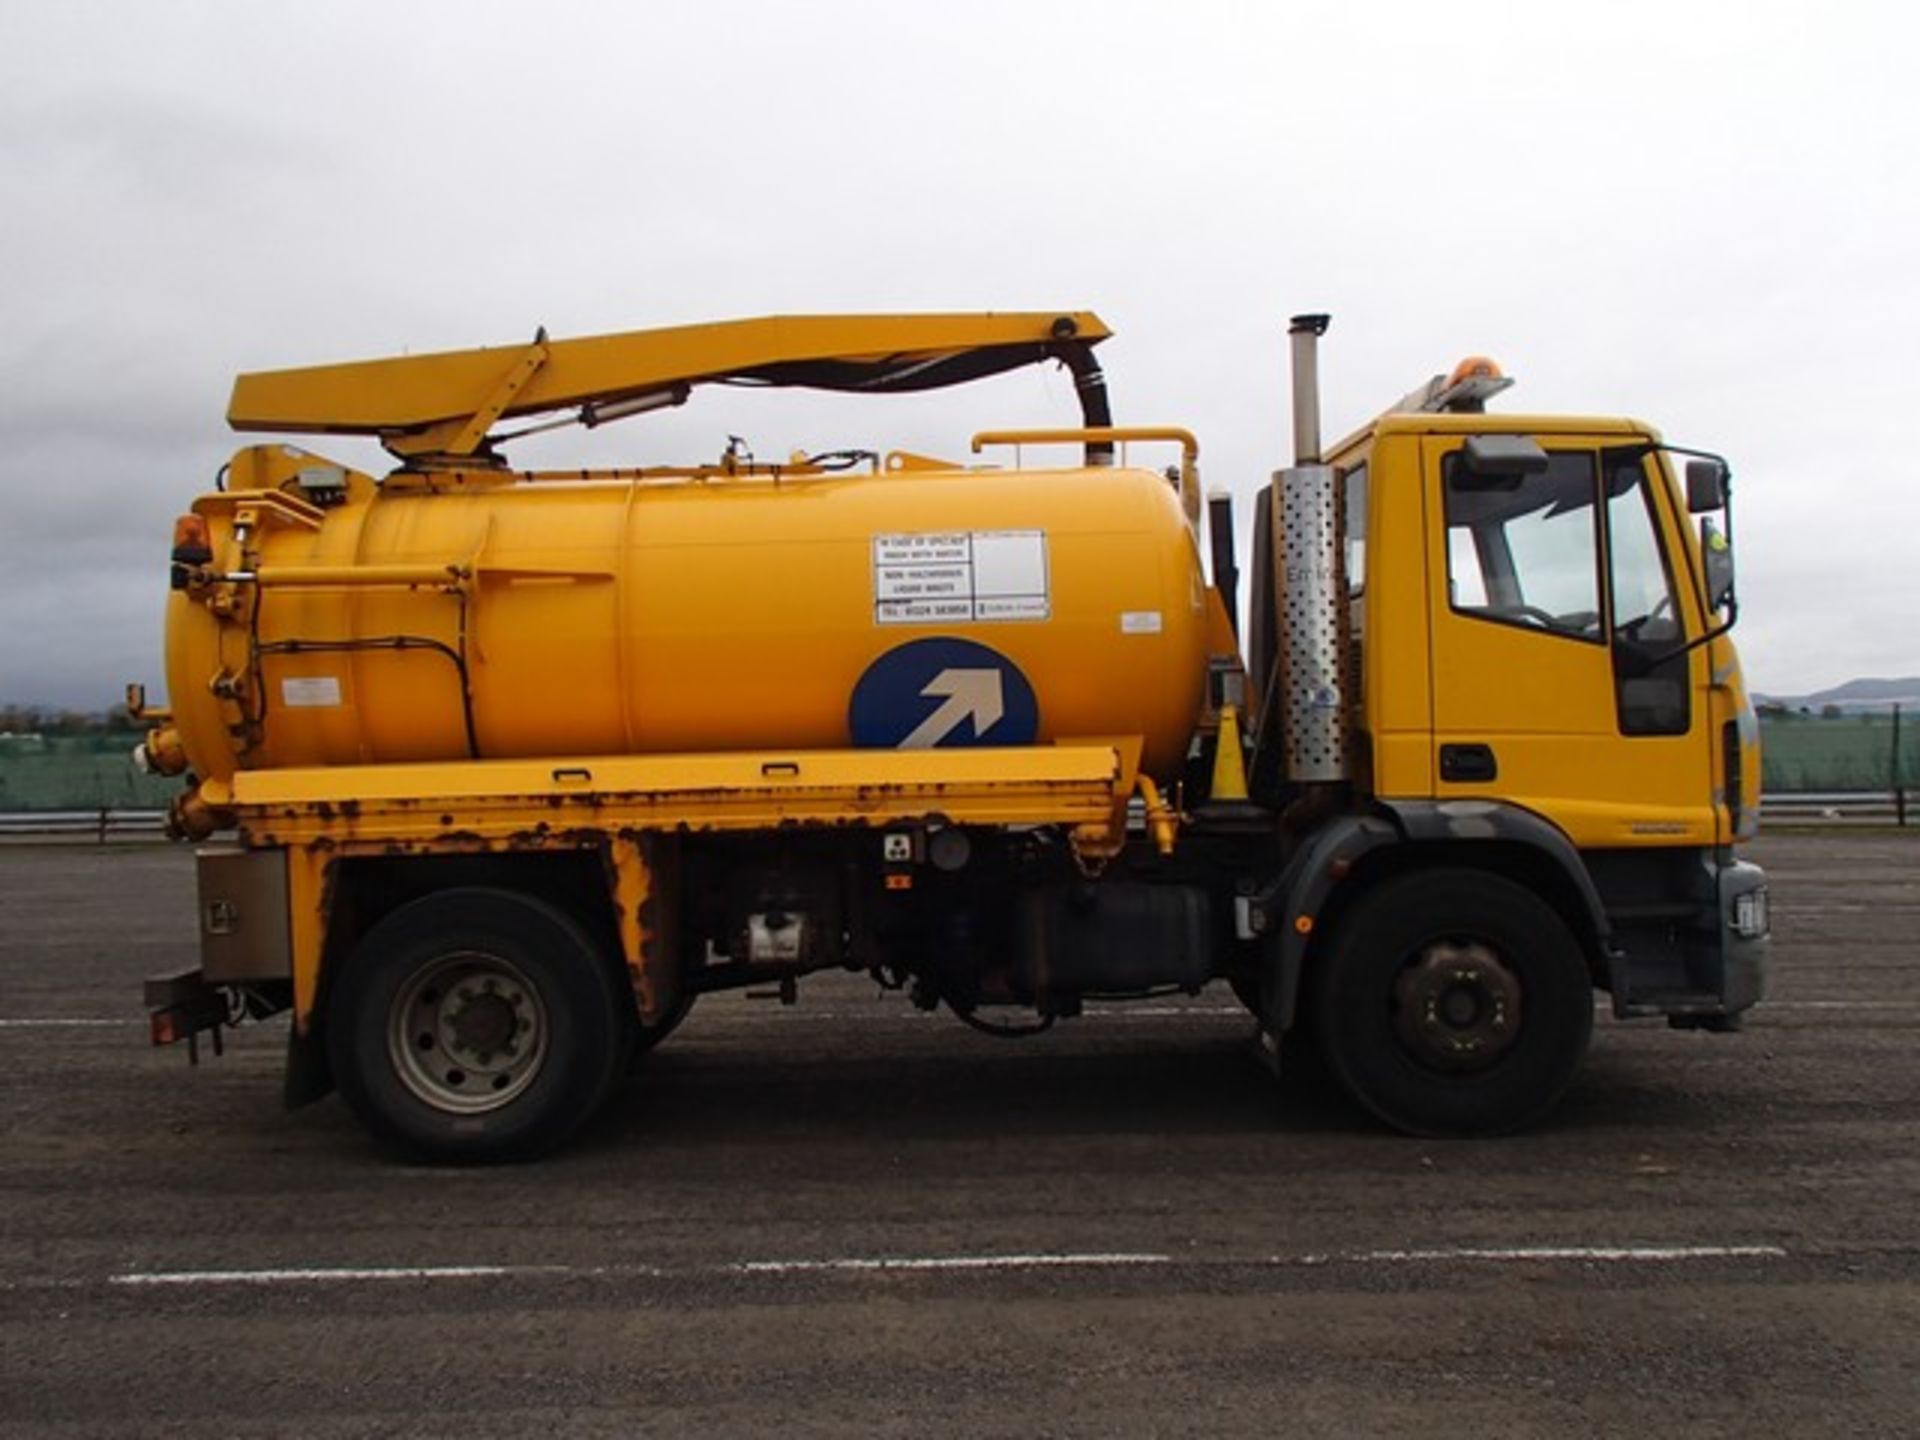 IVECO EUROCARGO - 5880cc
Body: 2 Dr Truck
Color: Yellow
First Reg: 01/01/2005
Doors: 2
MOT: 31/10/ - Image 15 of 15